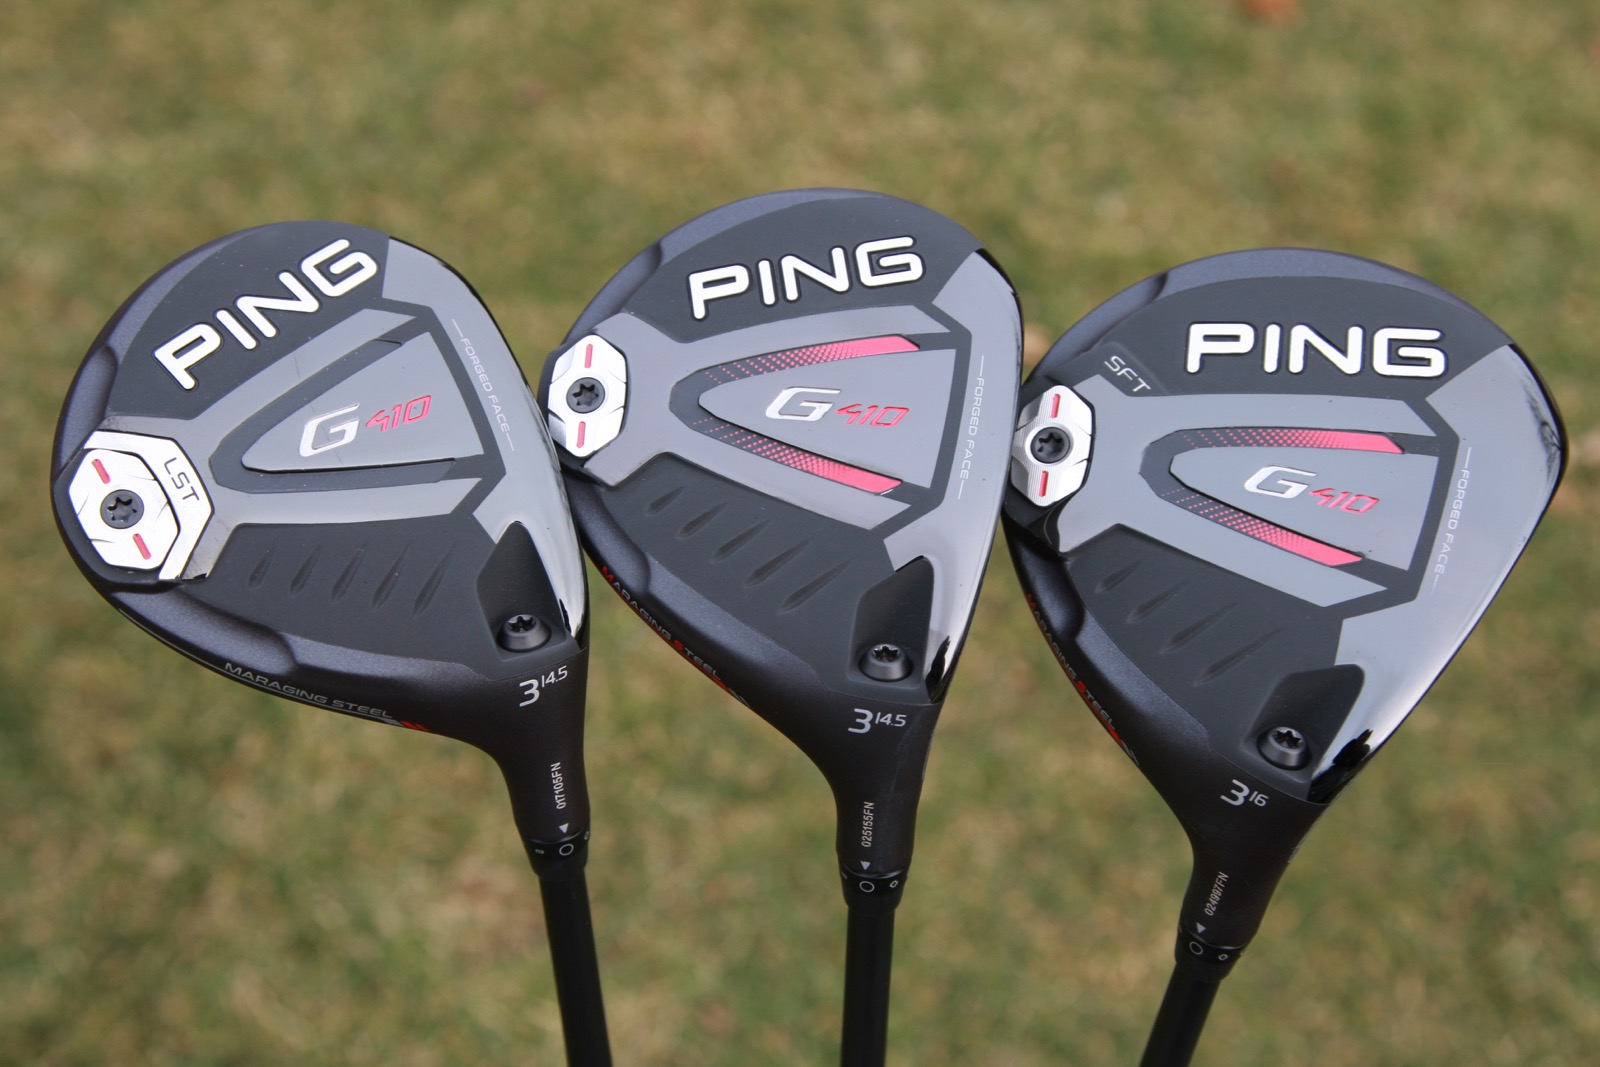 New Ping G410 fairway woods feature Maraging Steel Face technology